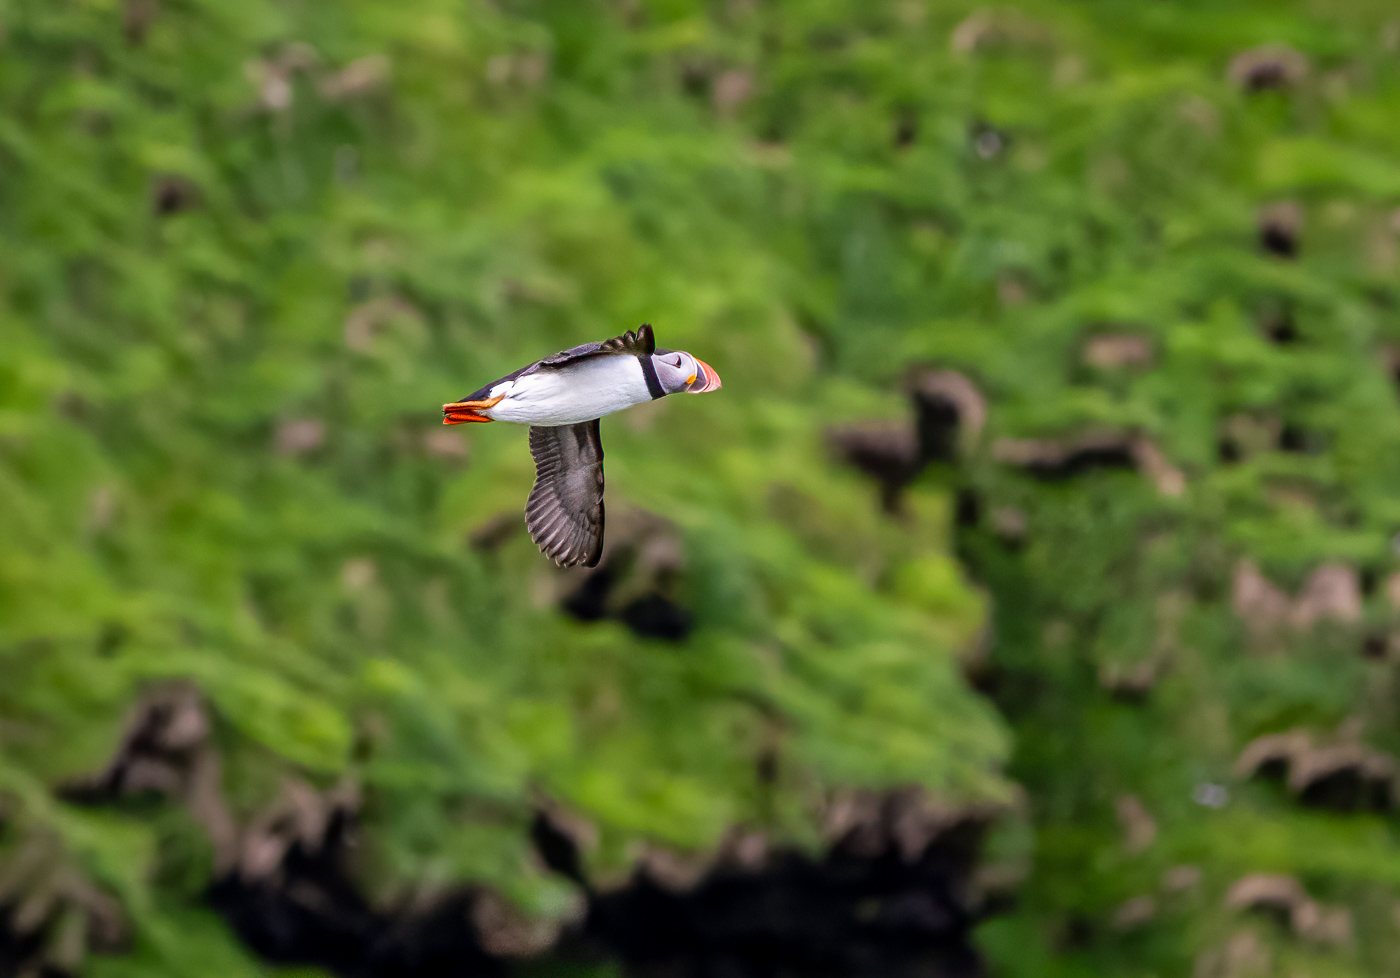 Puffin Flight to Gather Food by Randall Gusdorf